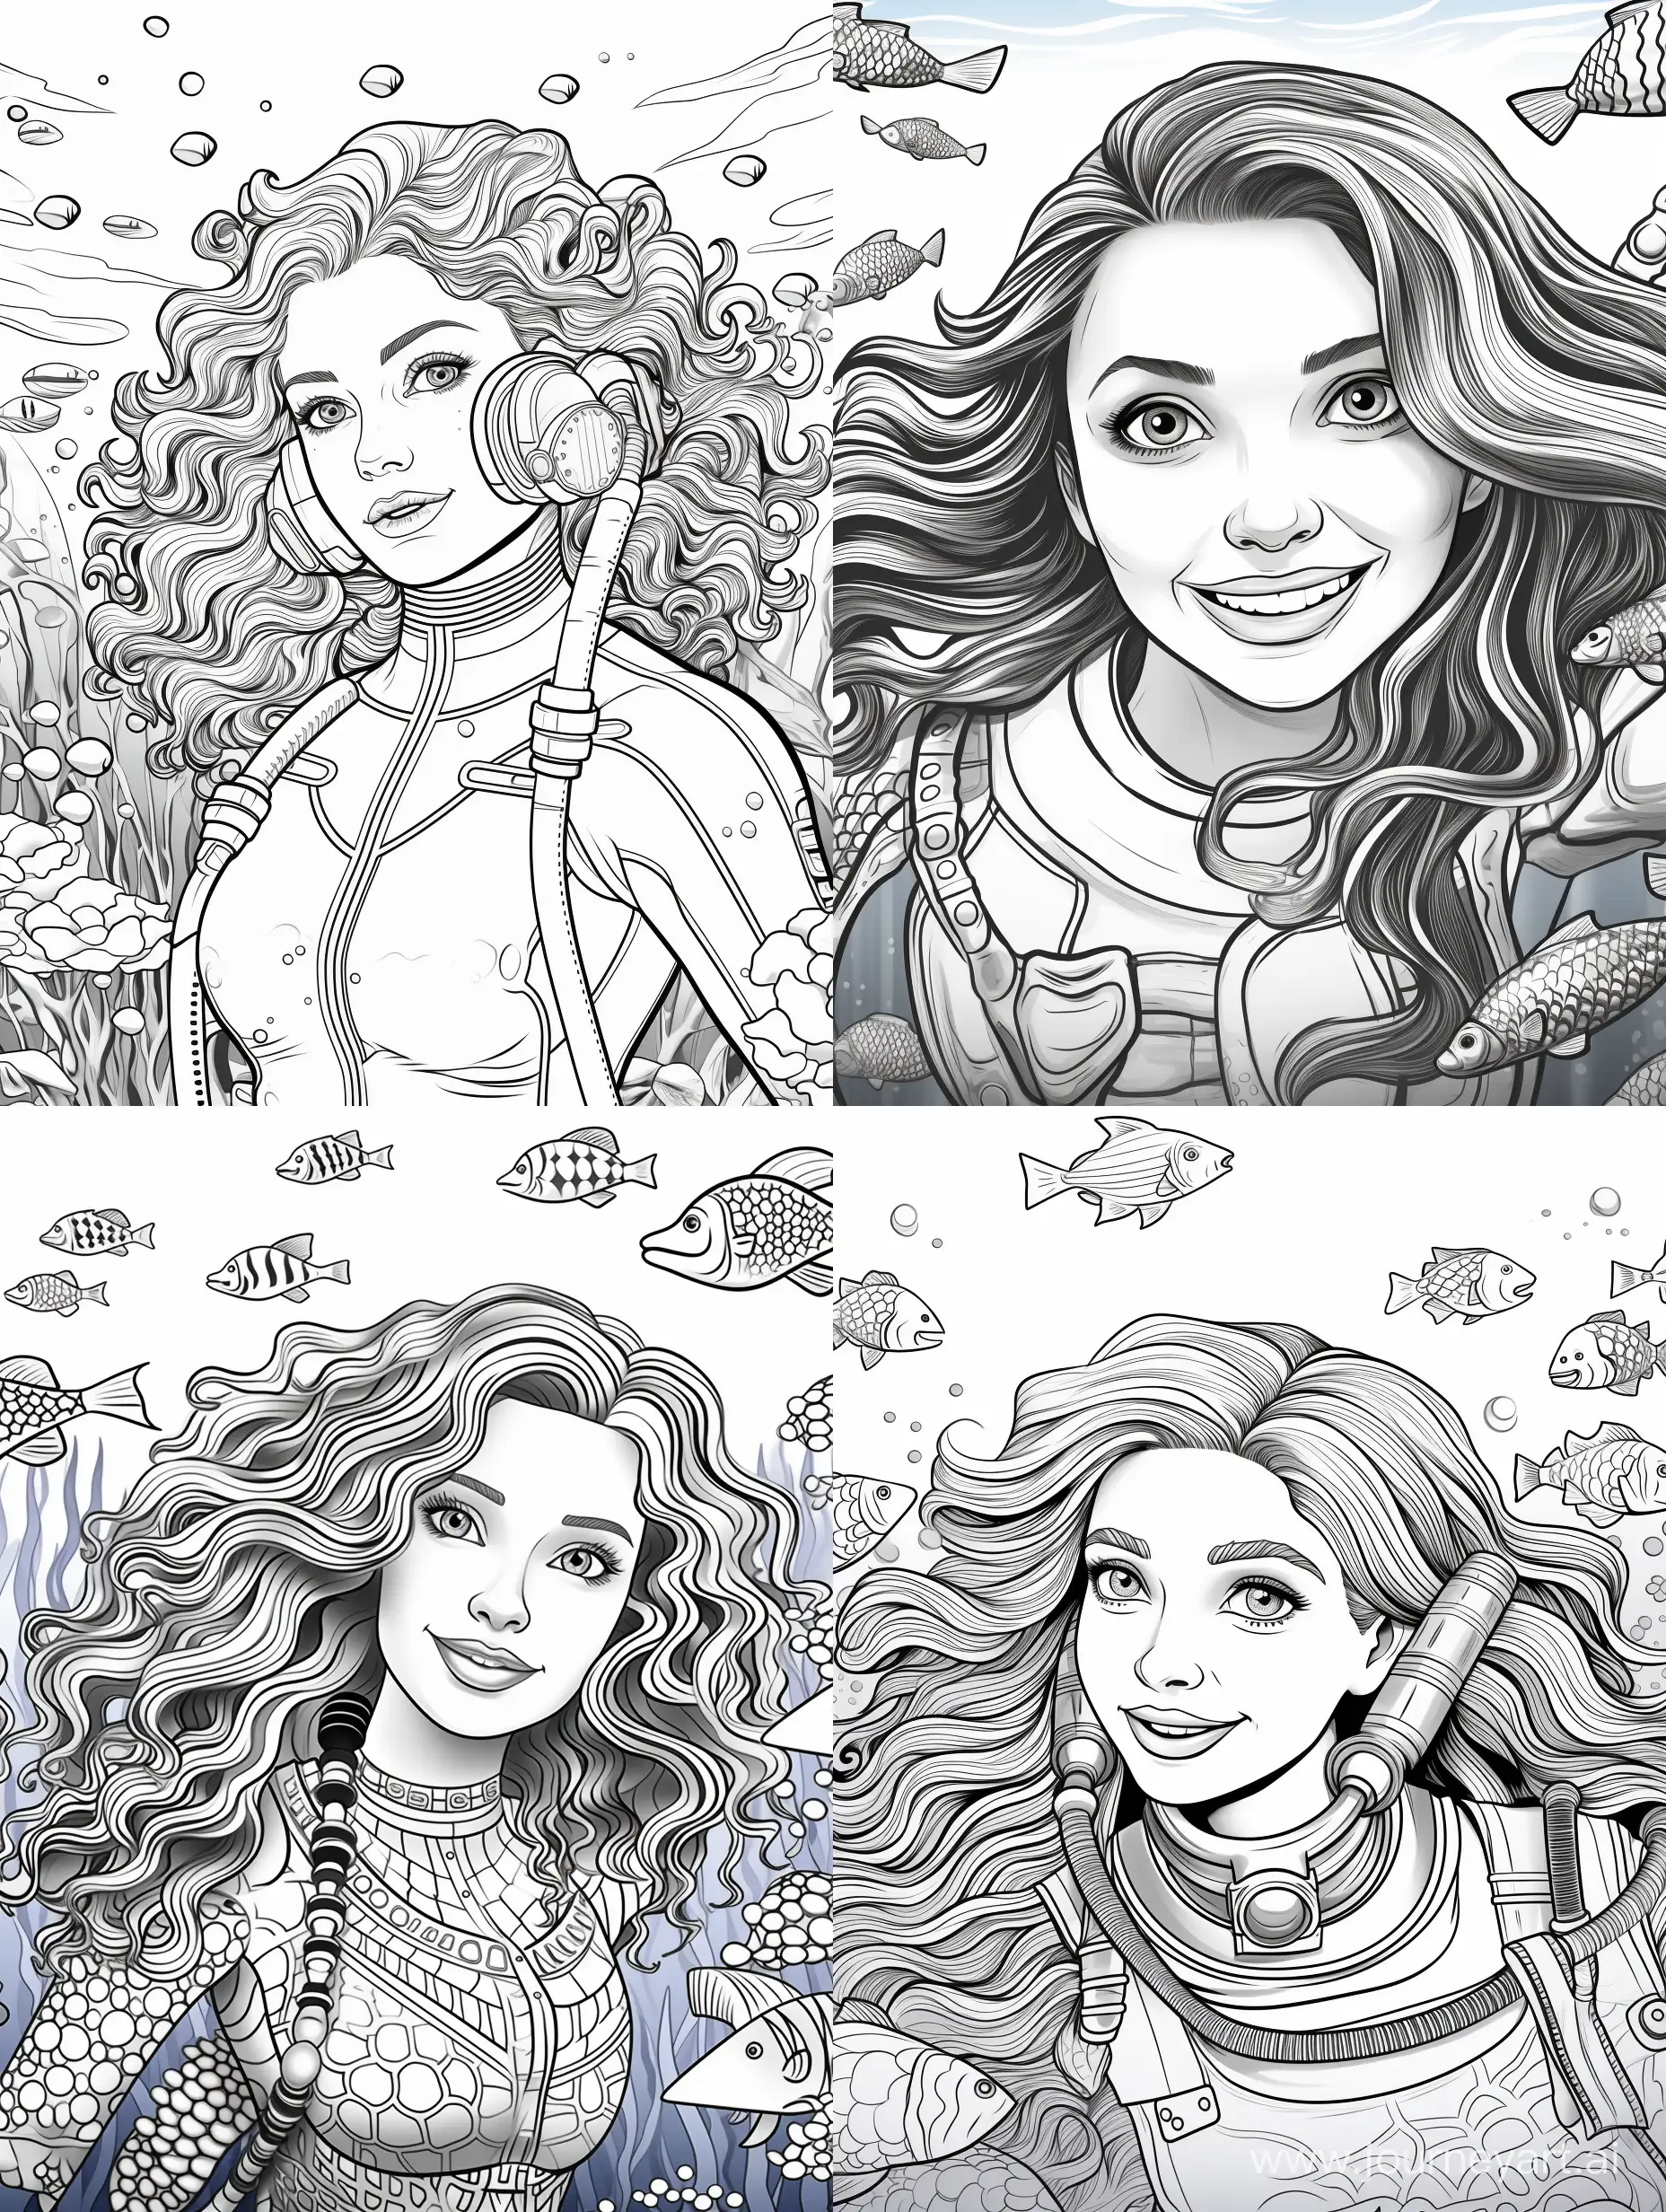 Coloring page for adults, cartoon style, one thin girl long flat hair, one curvy girl medium curly hair, happy, scuba diving, seabed, much detail